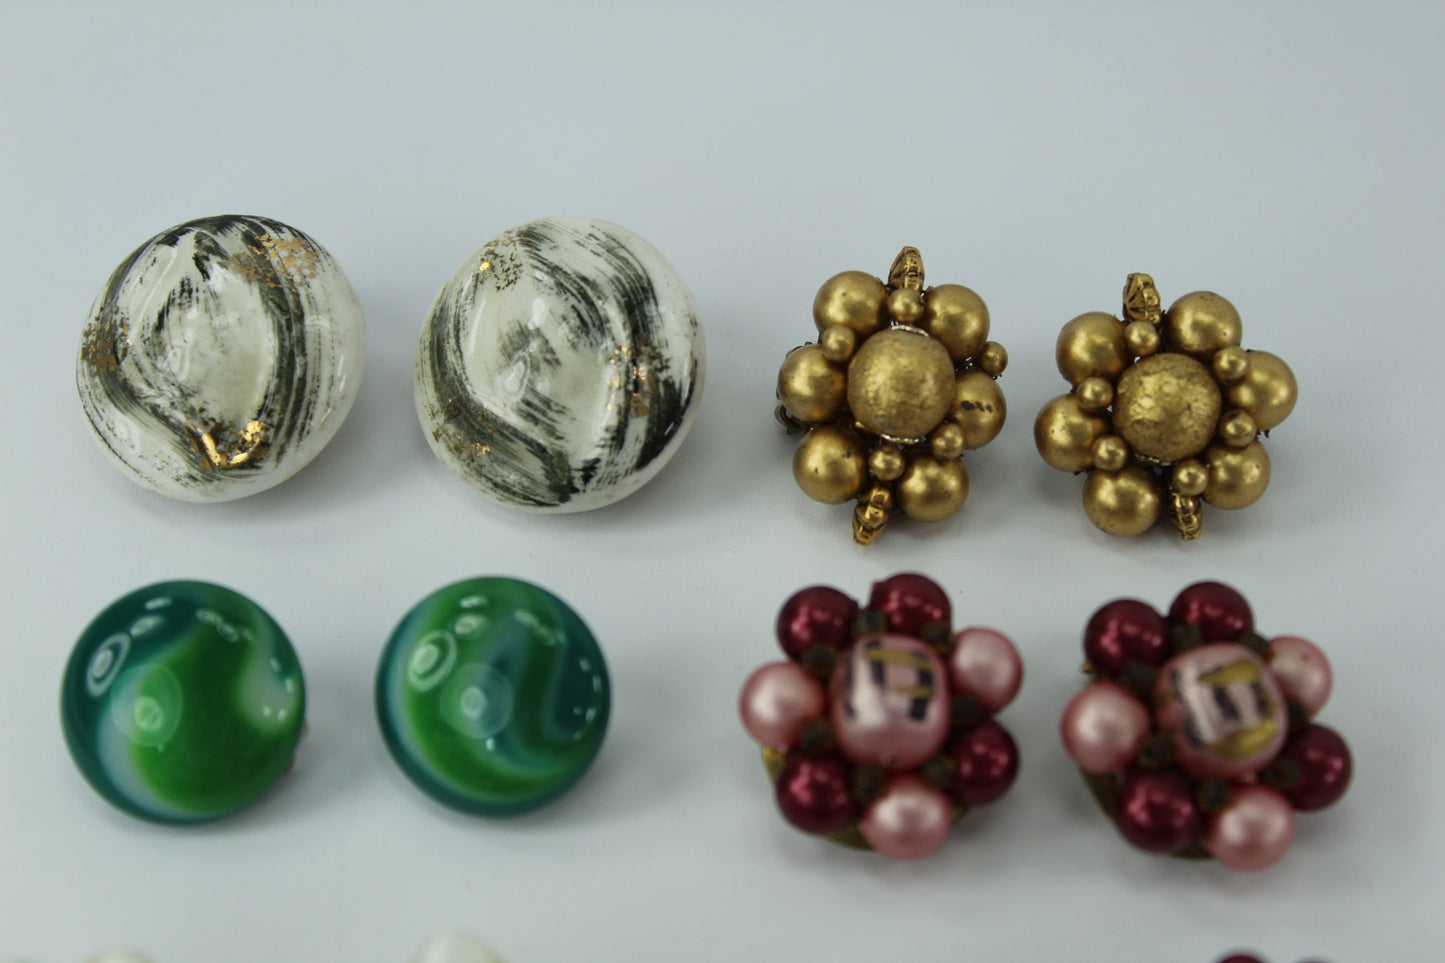 Vintage Earrings Clip Collection 7 Pairs Japan Hong Kong Bead Clusters Ceramic wired